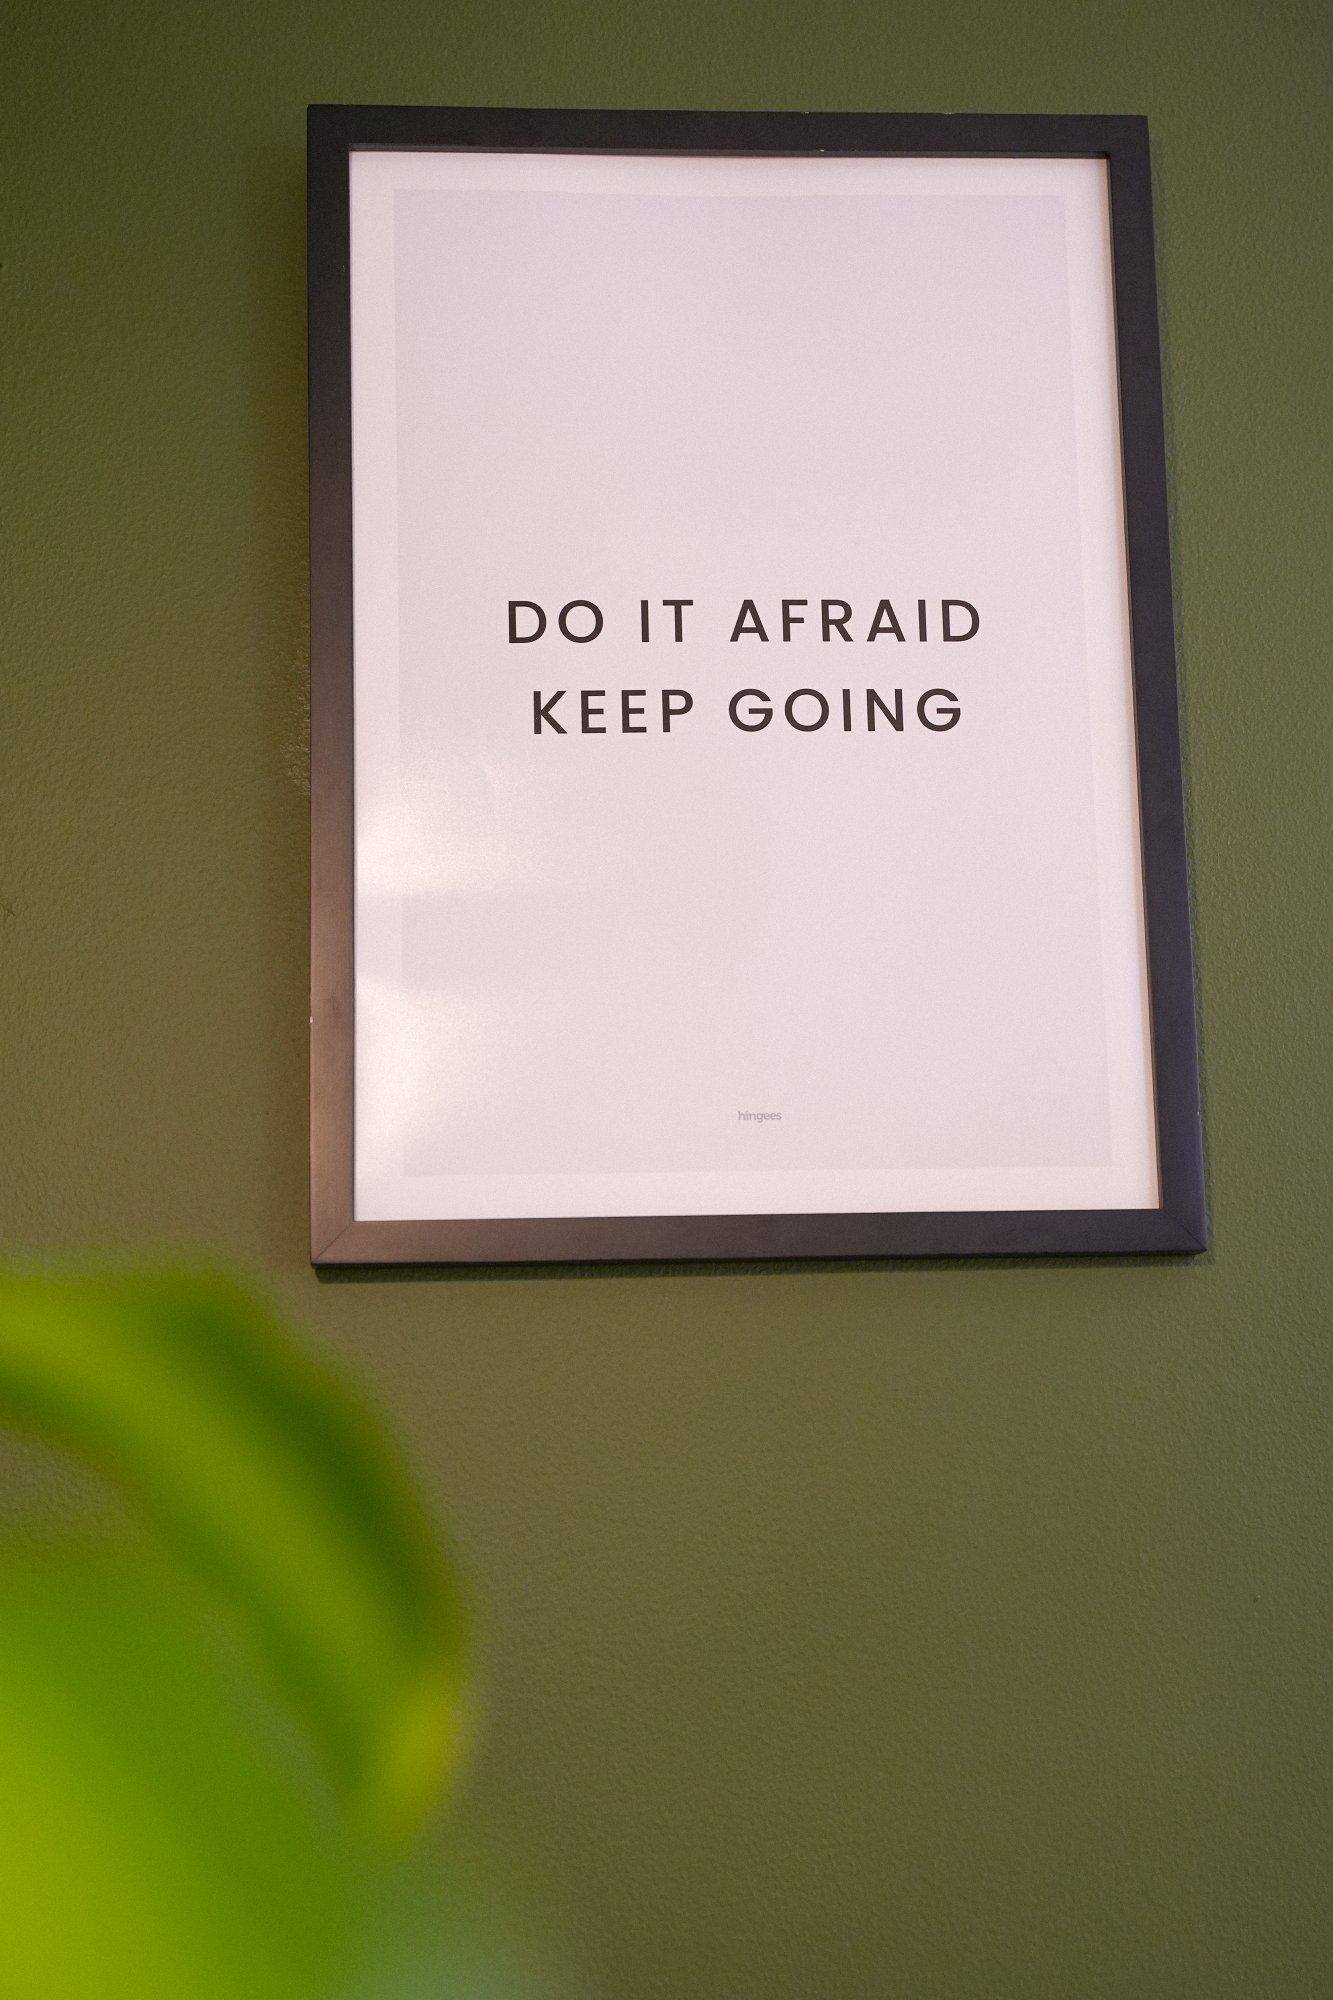 A motivational wall poster with the DO IT AFRAID KEEP GOING quote